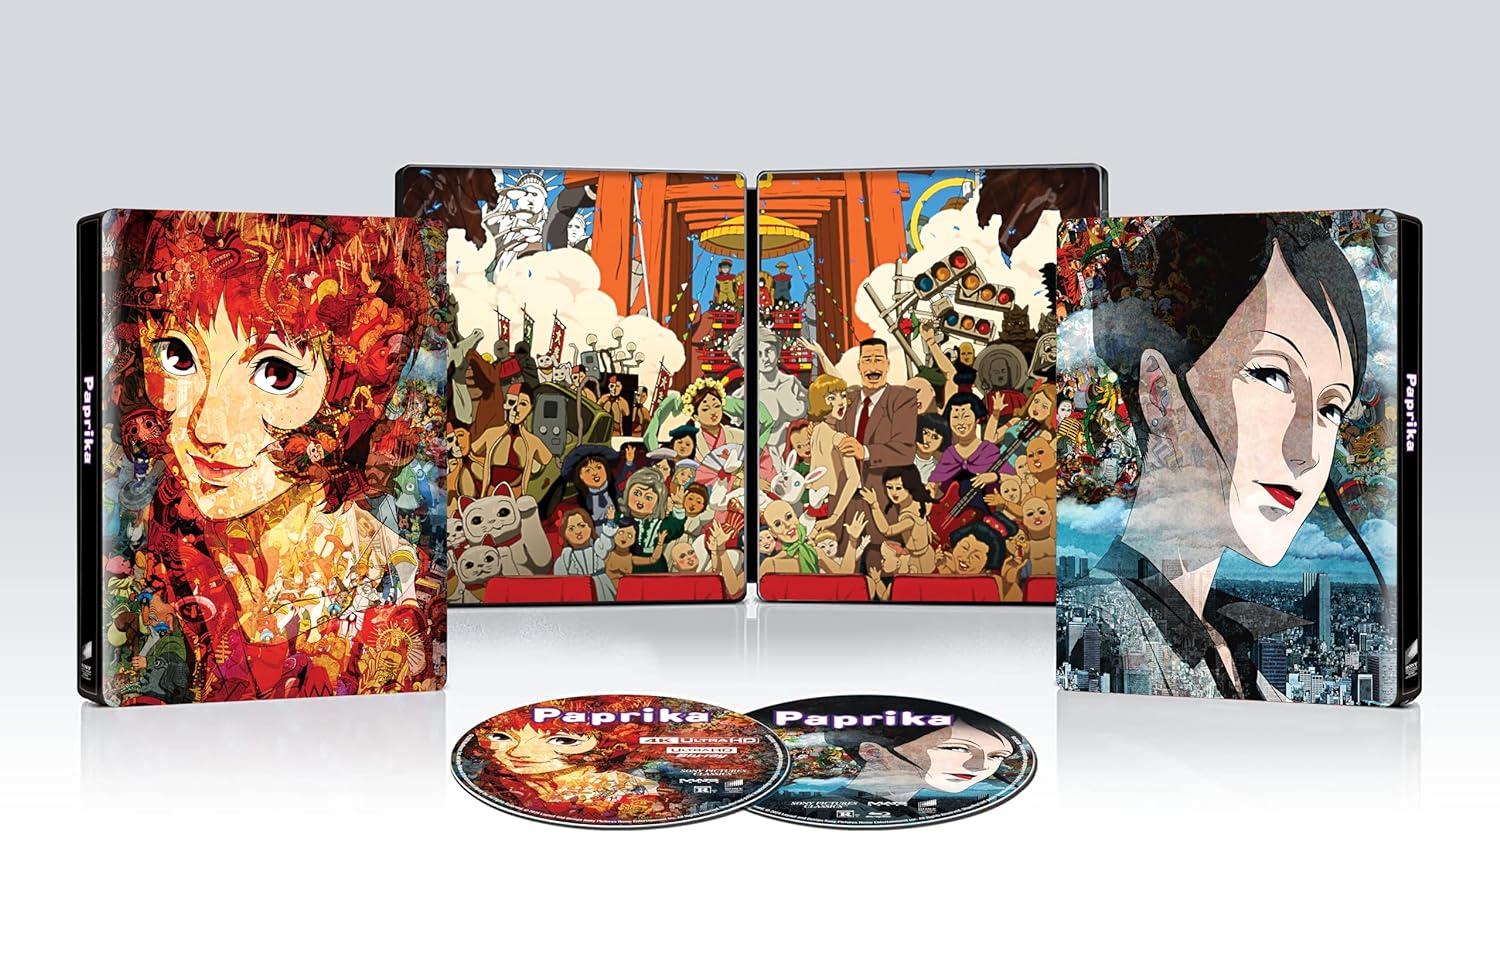 Paprika Limited Edition Steelbook 4K Ultra HD + Blu-ray for $27.59